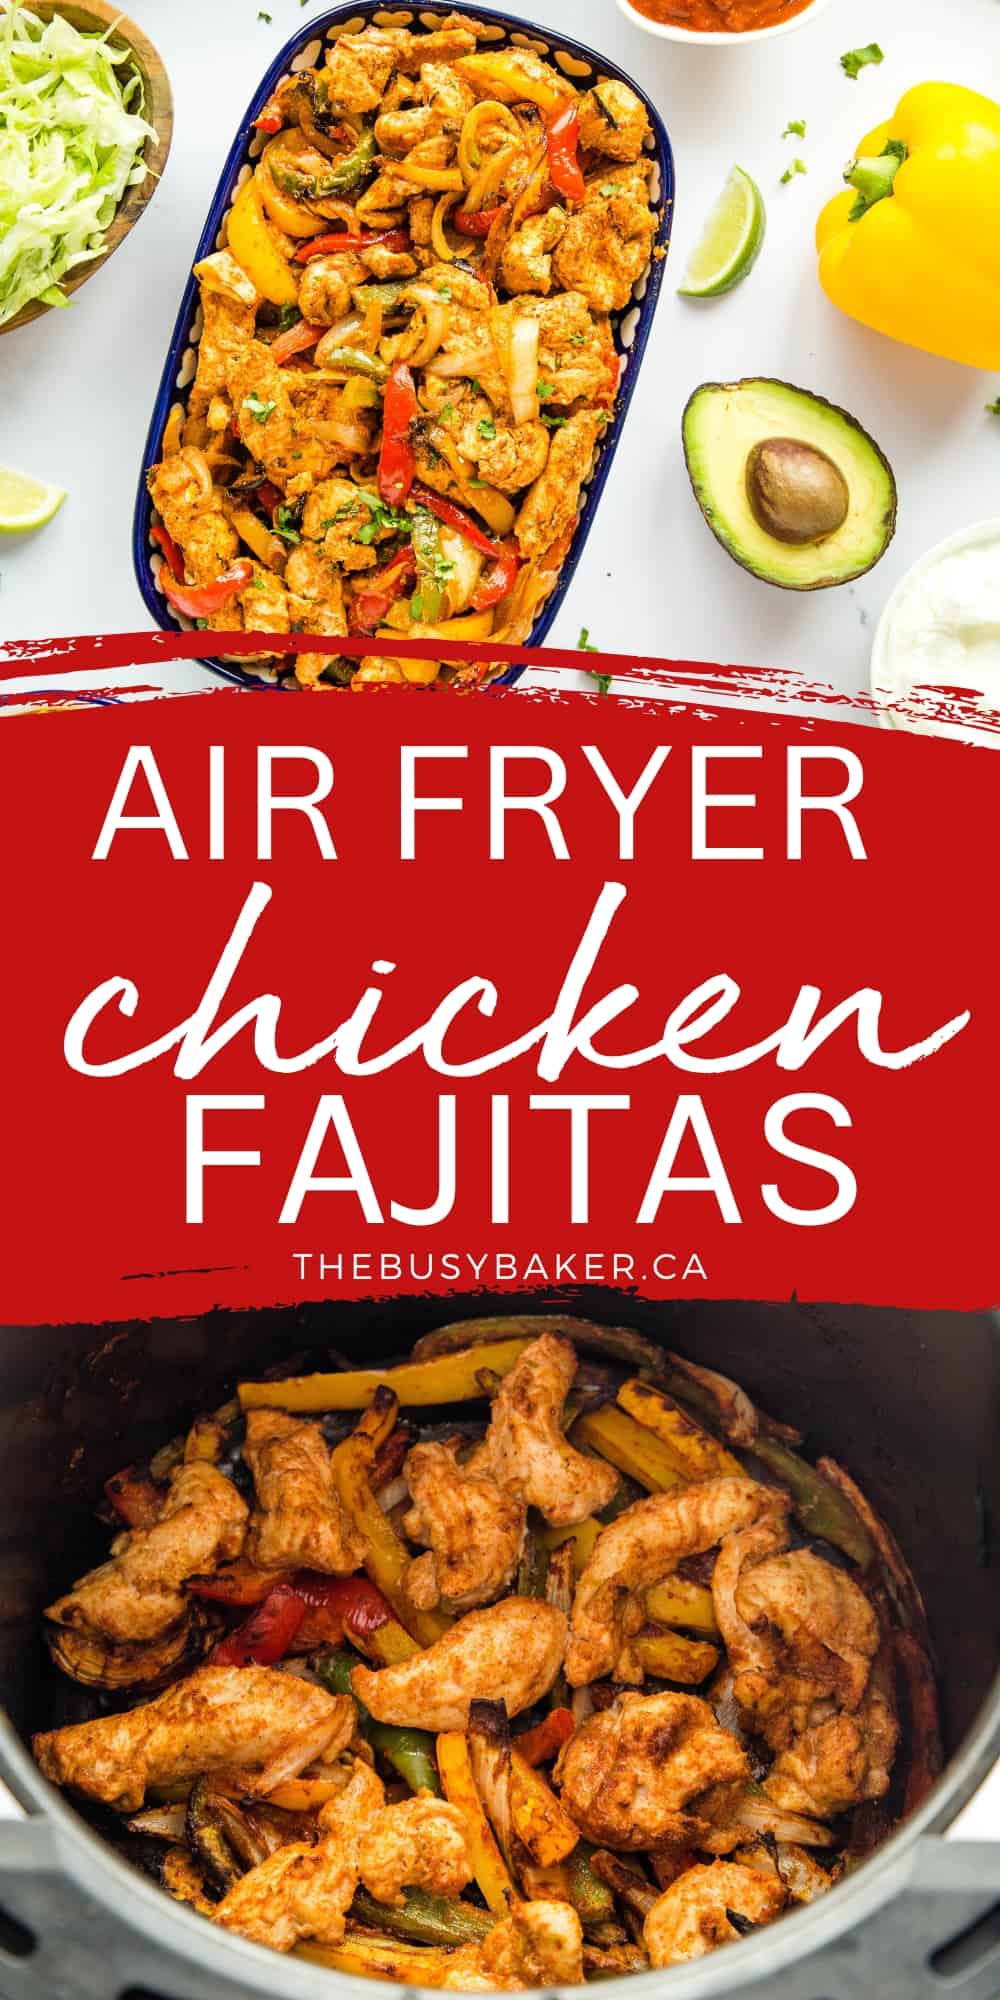 These Air Fryer Chicken Fajitas are the best easy weeknight meal - Mexican-style! Tender chicken, fajita spices, grilled peppers - ready in 15 minutes! Recipe from thebusybaker.ca! #airfryerchickenfajitas #chickenfajitas #airfryerfajitas #chickenrecipe #mexicanfood #easymeal #easydinner #mexicandinner #fajitas via @busybakerblog